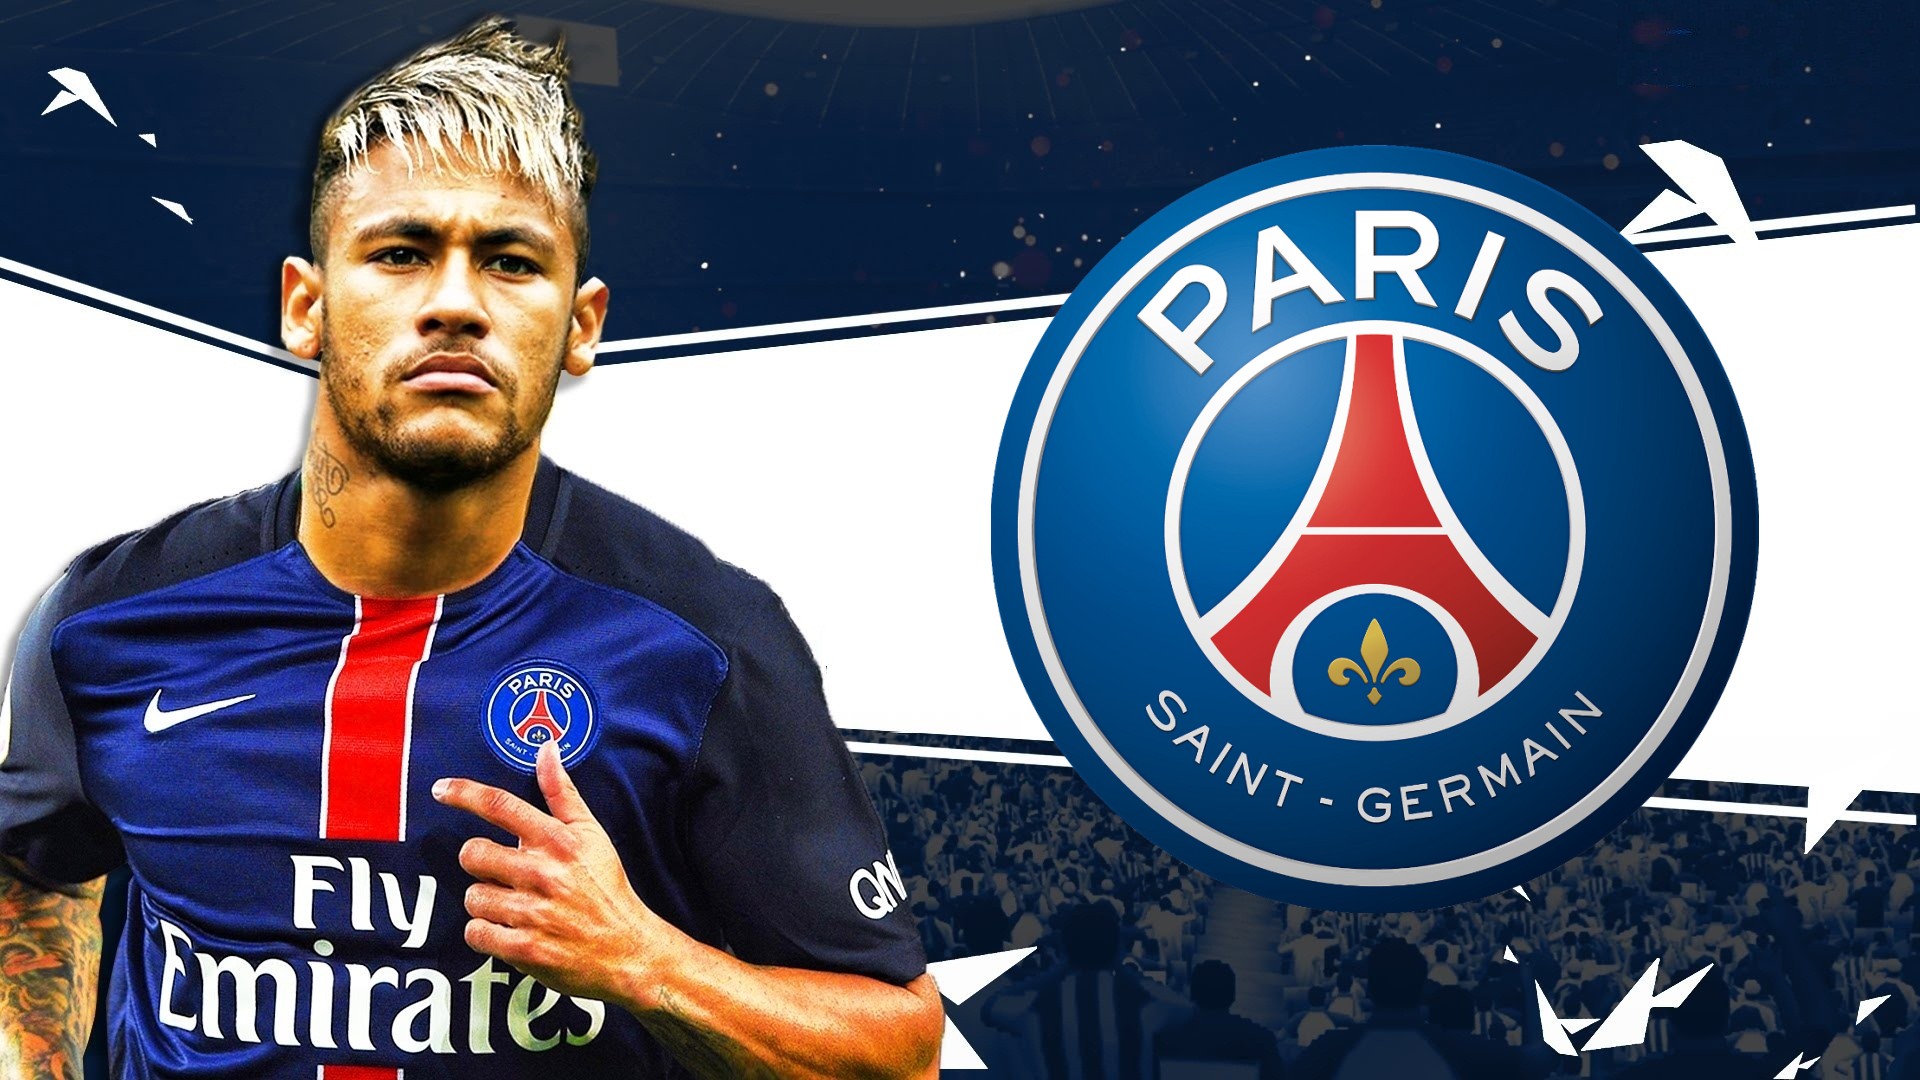 Neymar PSG Desktop Wallpapers With Resolution 1920X1080 pixel. You can make this wallpaper for your Mac or Windows Desktop Background, iPhone, Android or Tablet and another Smartphone device for free